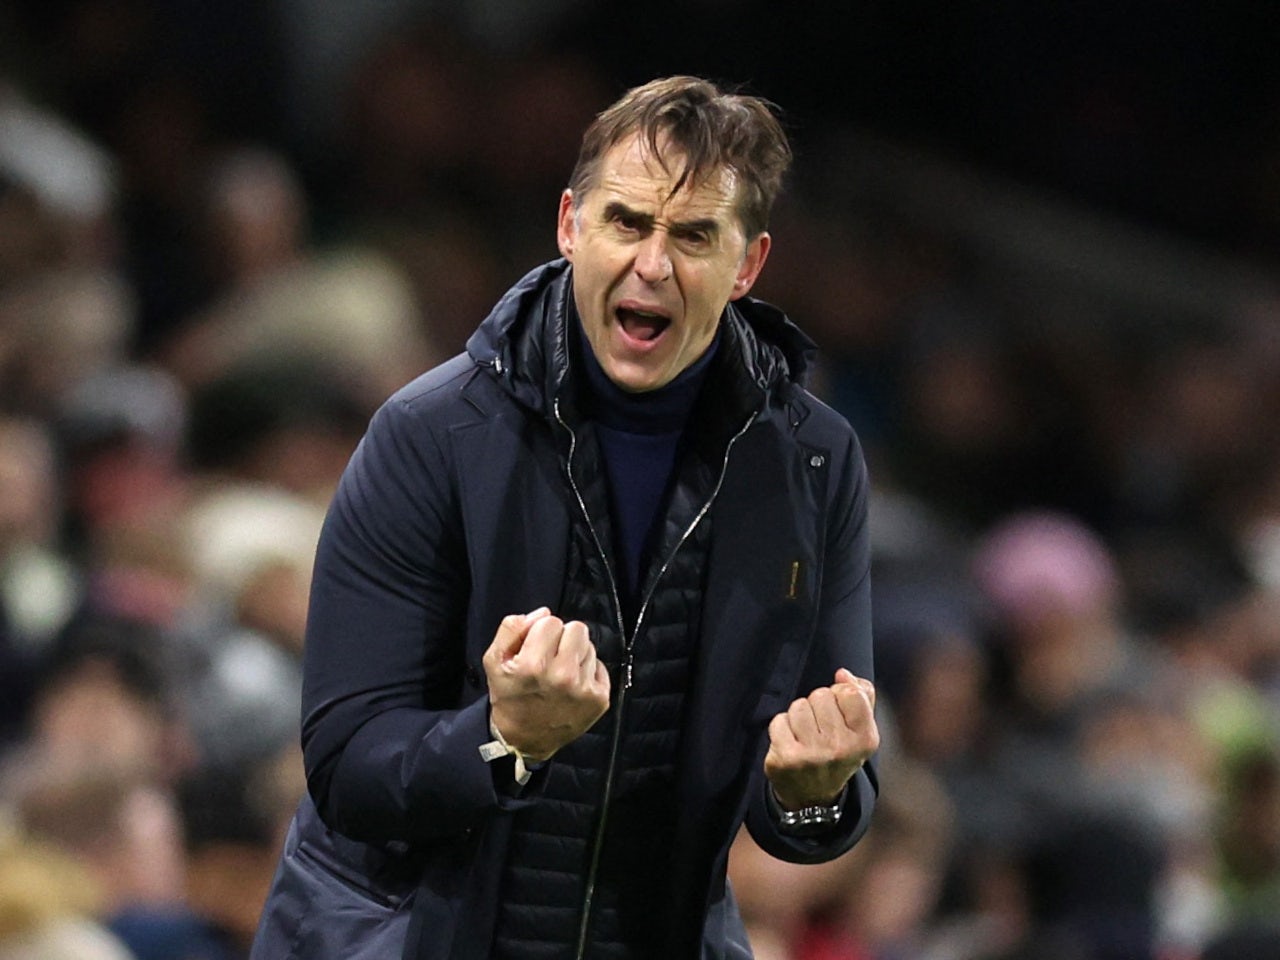 Lopetegui reunion inbound: West Ham 'on brink' of £40m signing with medical booked